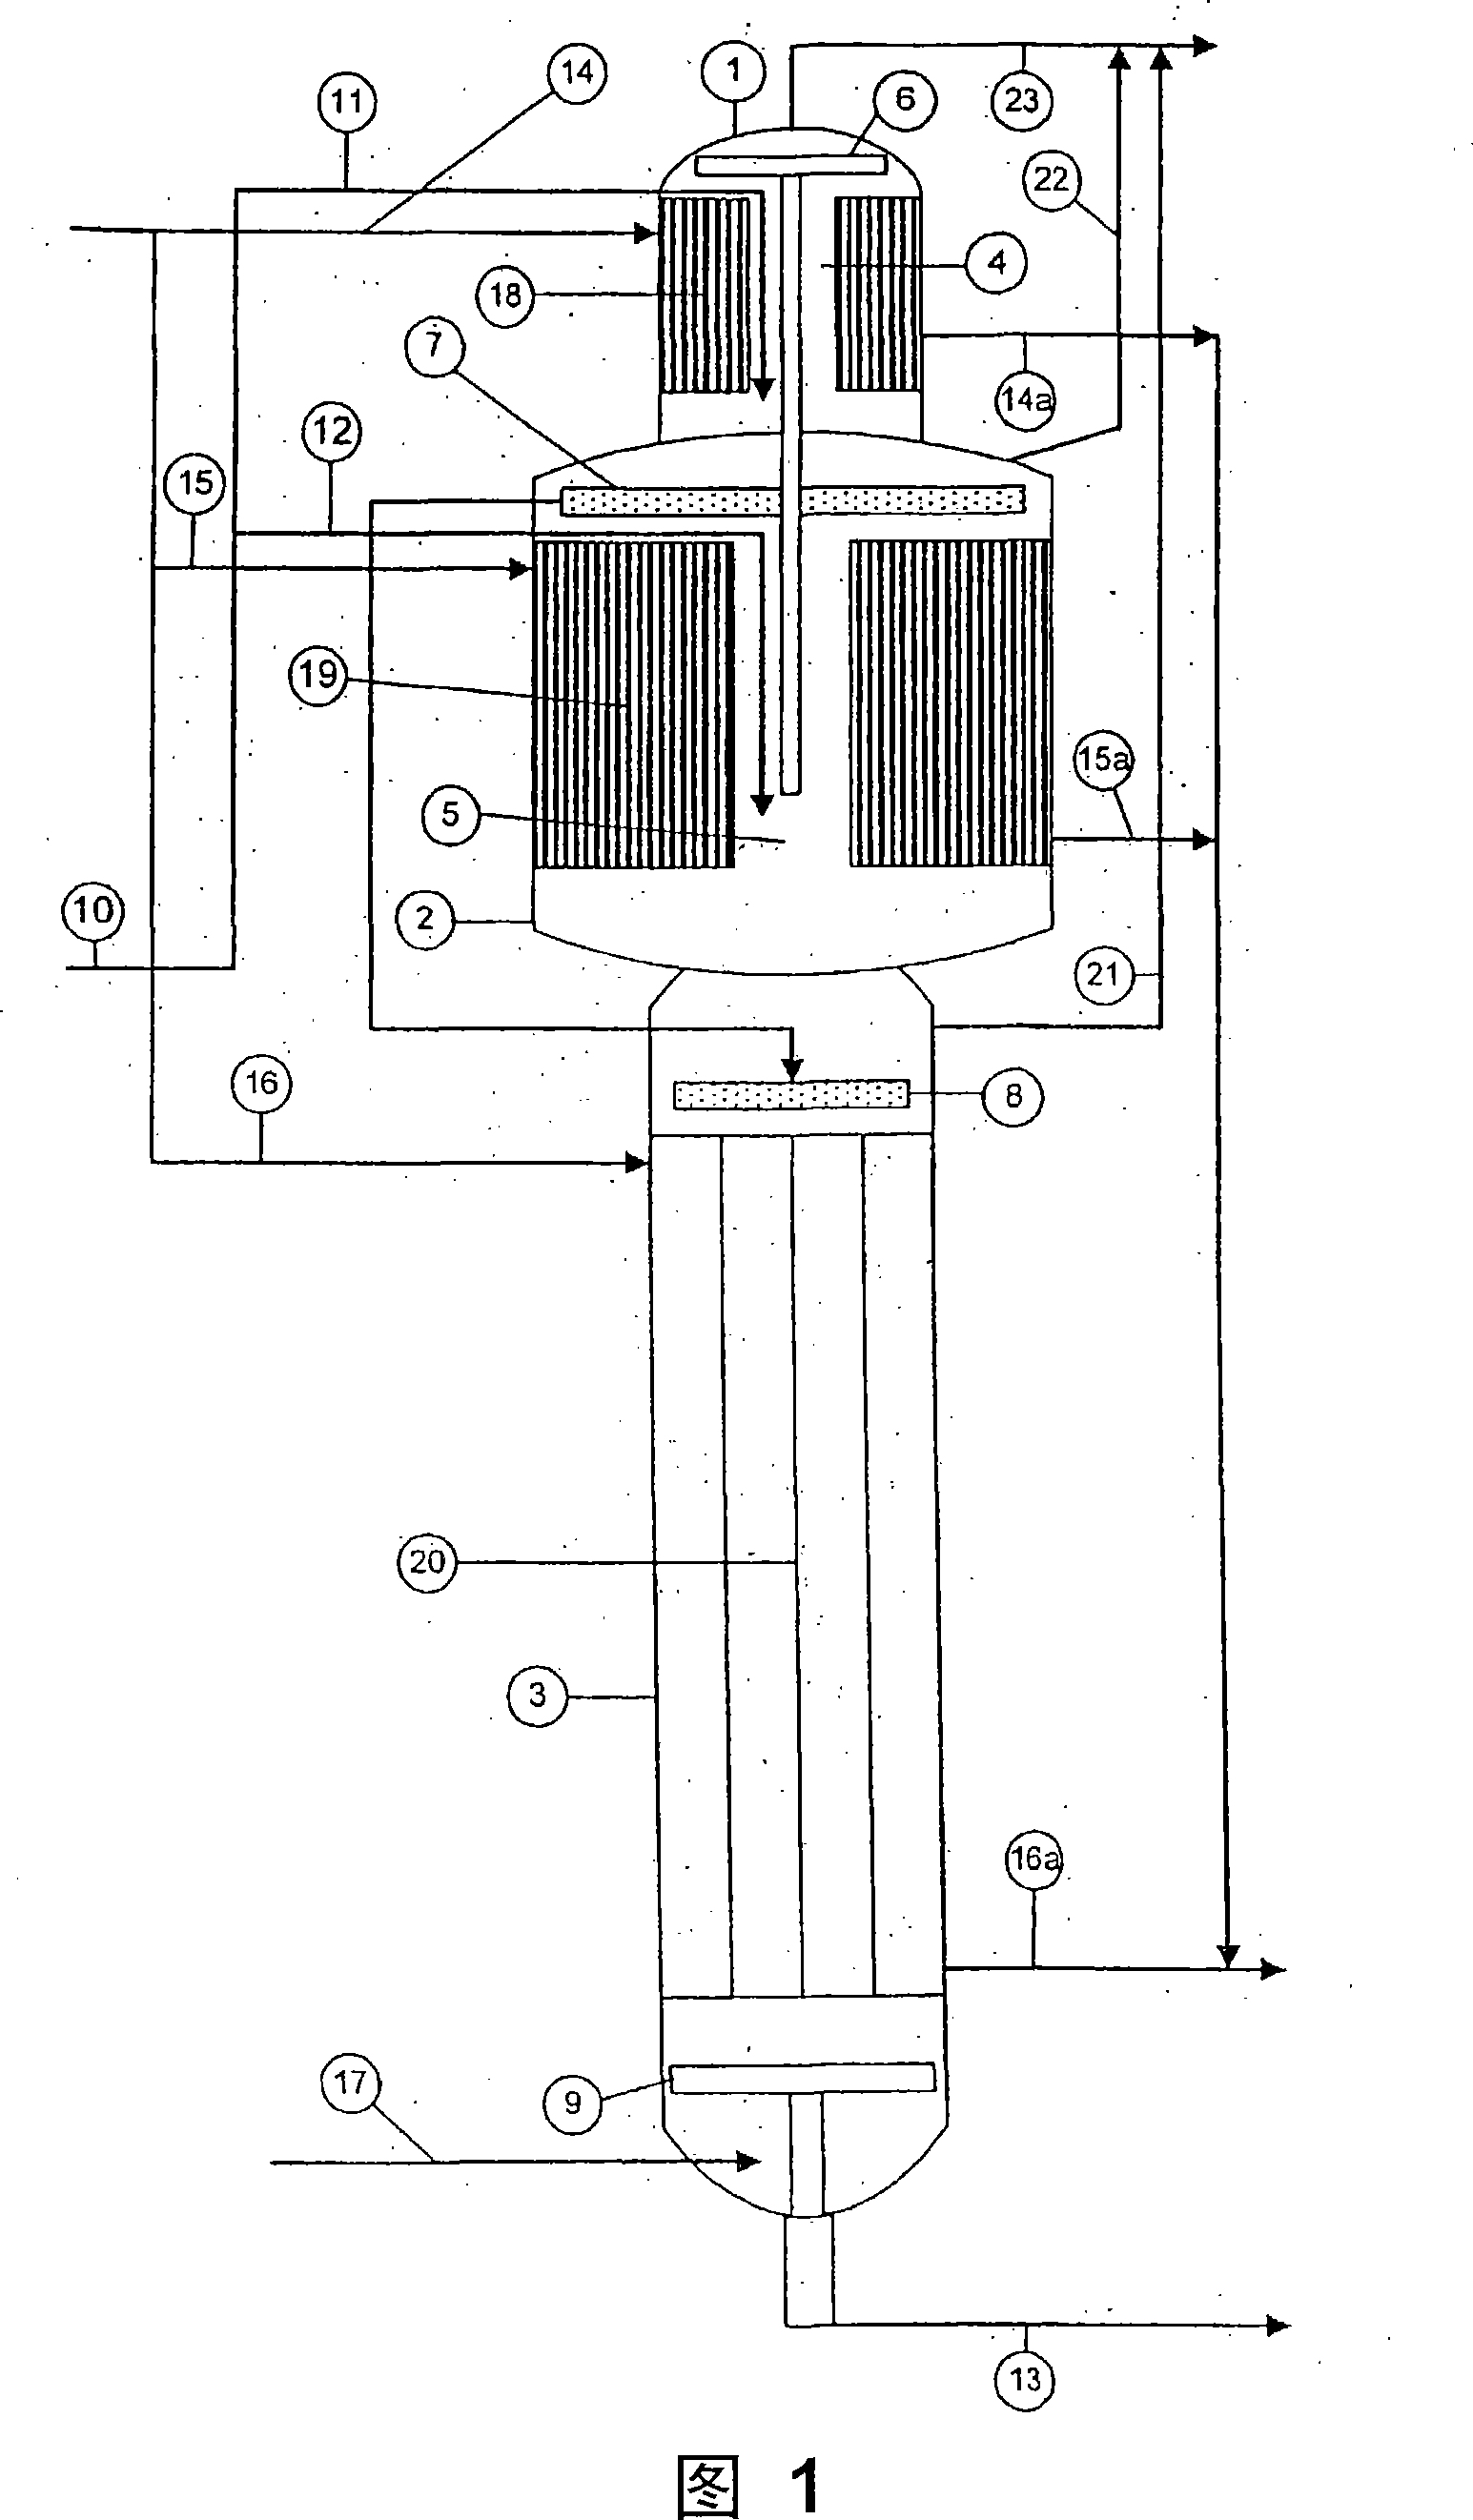 High pressure method for producing pure melamine in a vertical synthesis reactor